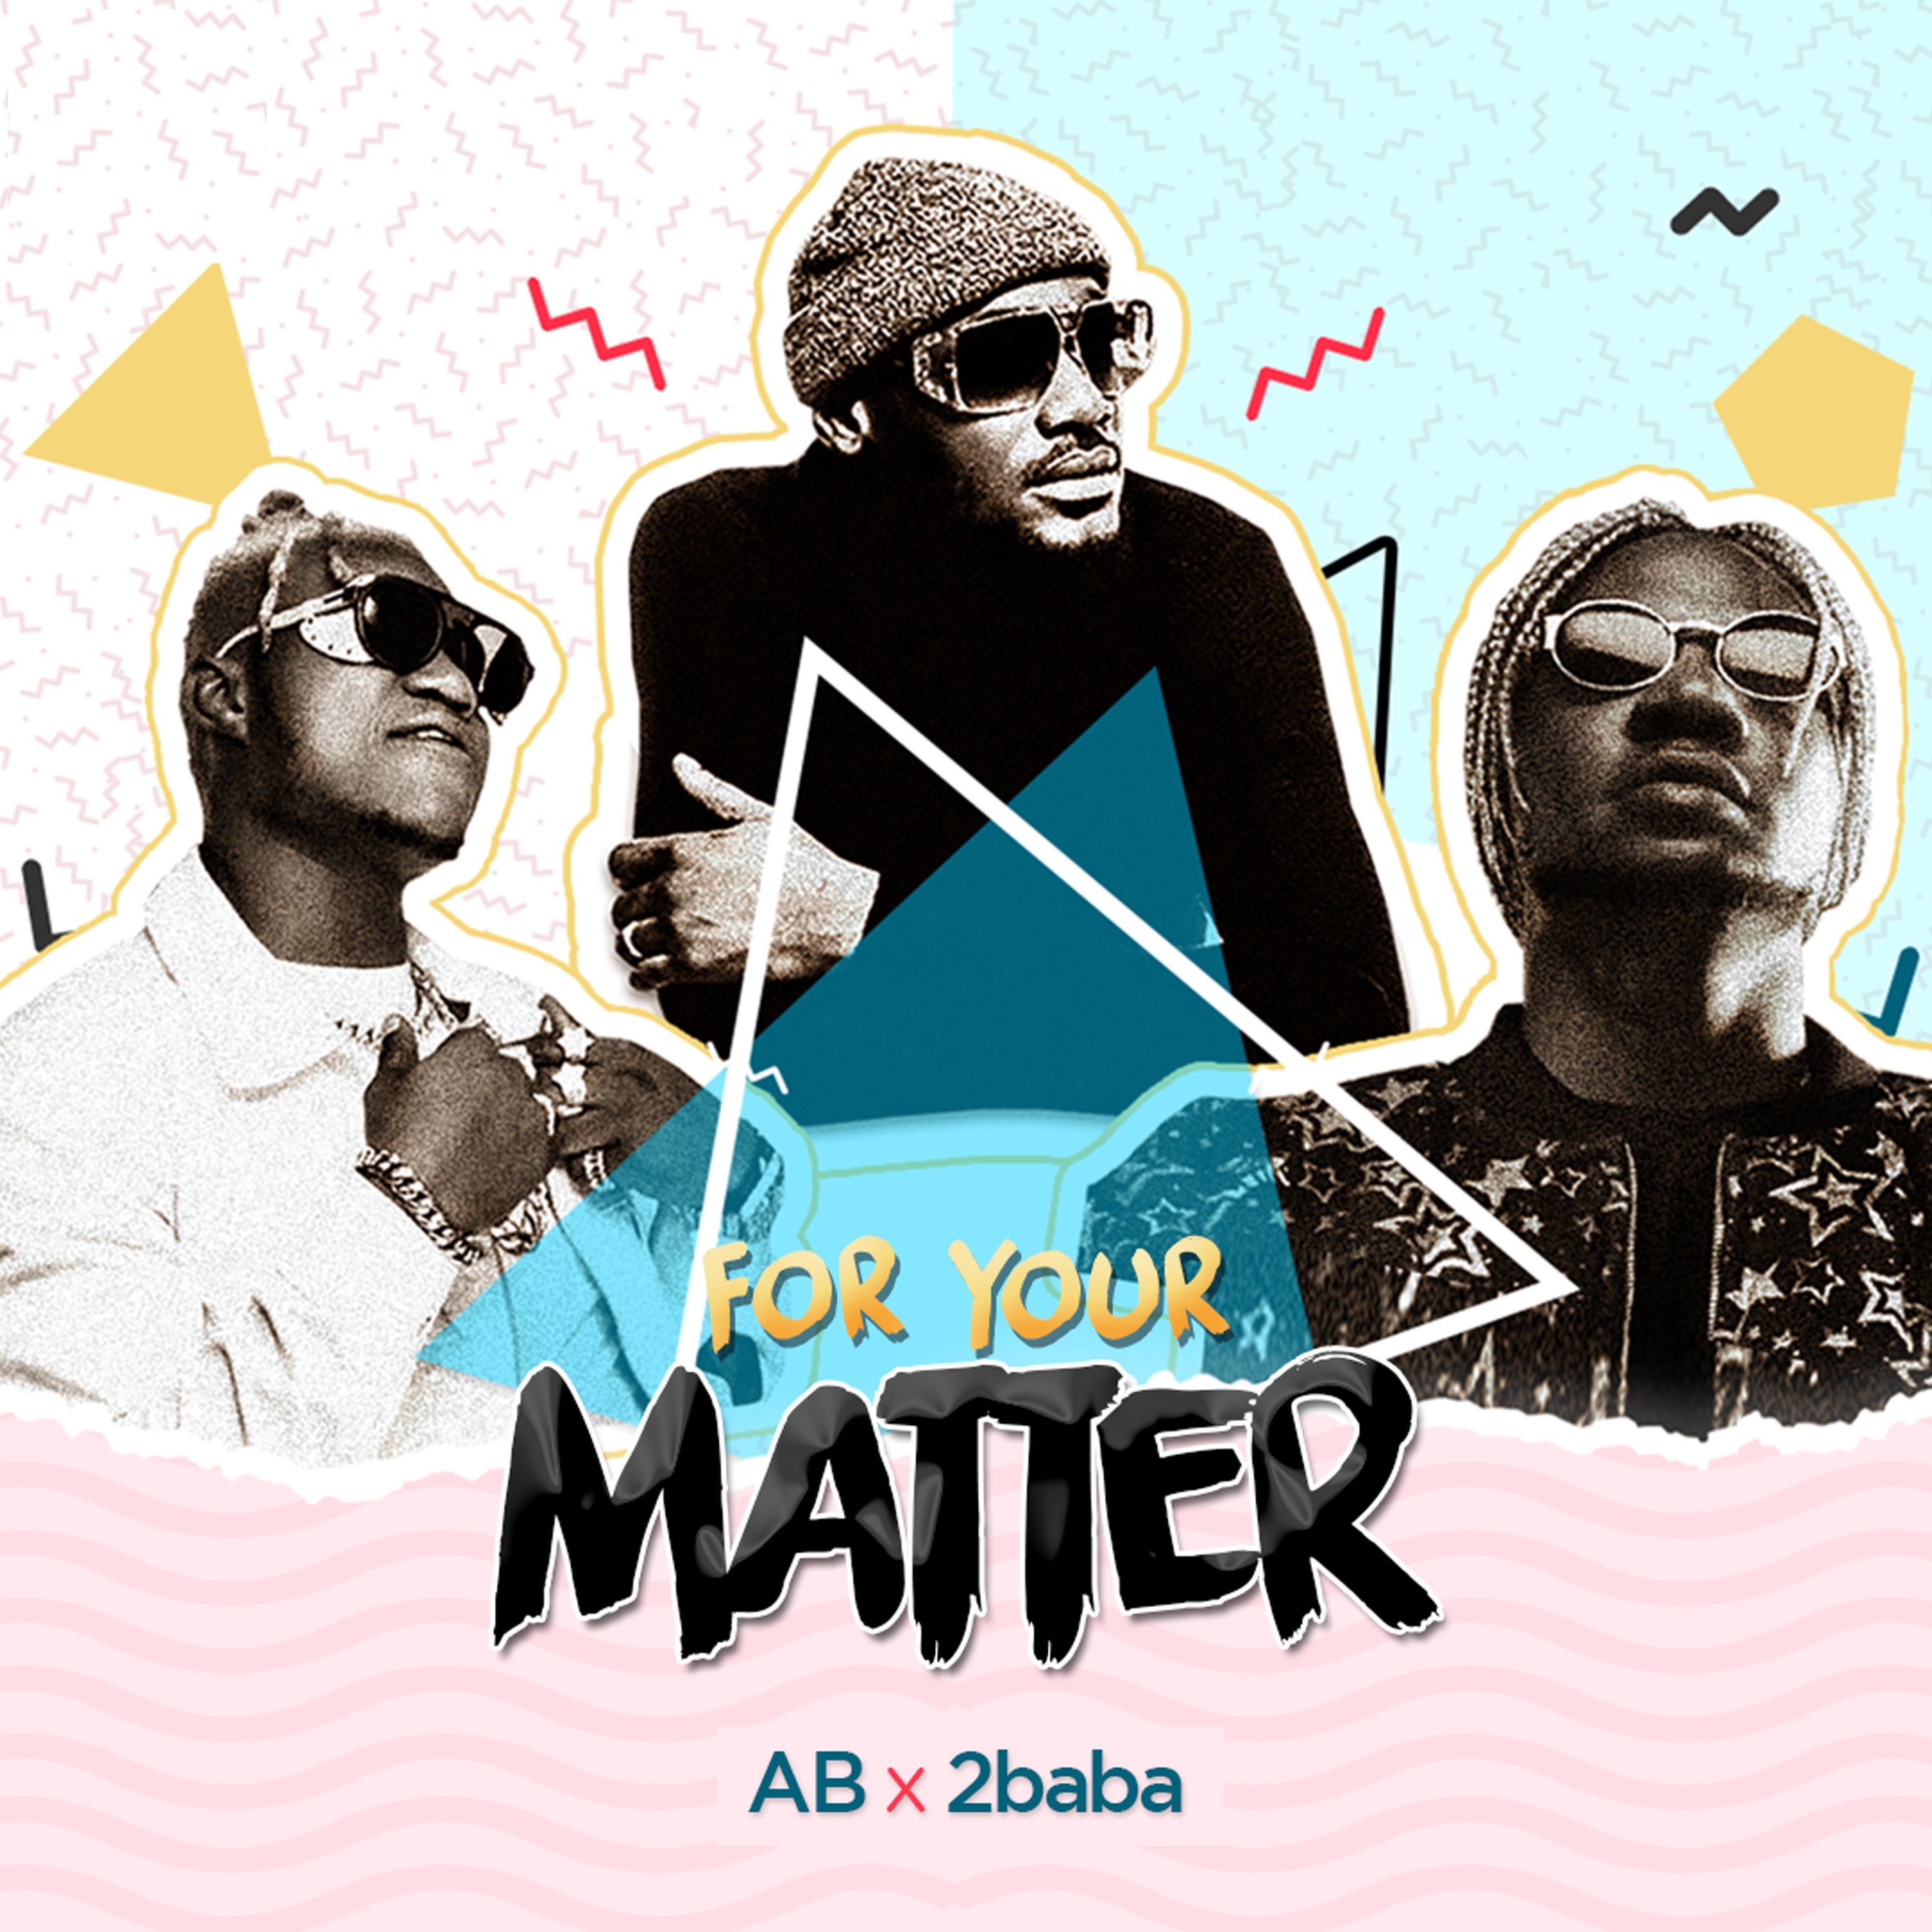 VIDEO + AUDIO: AB (Apex And Bionic) ft. 2BABA – For Your Matter